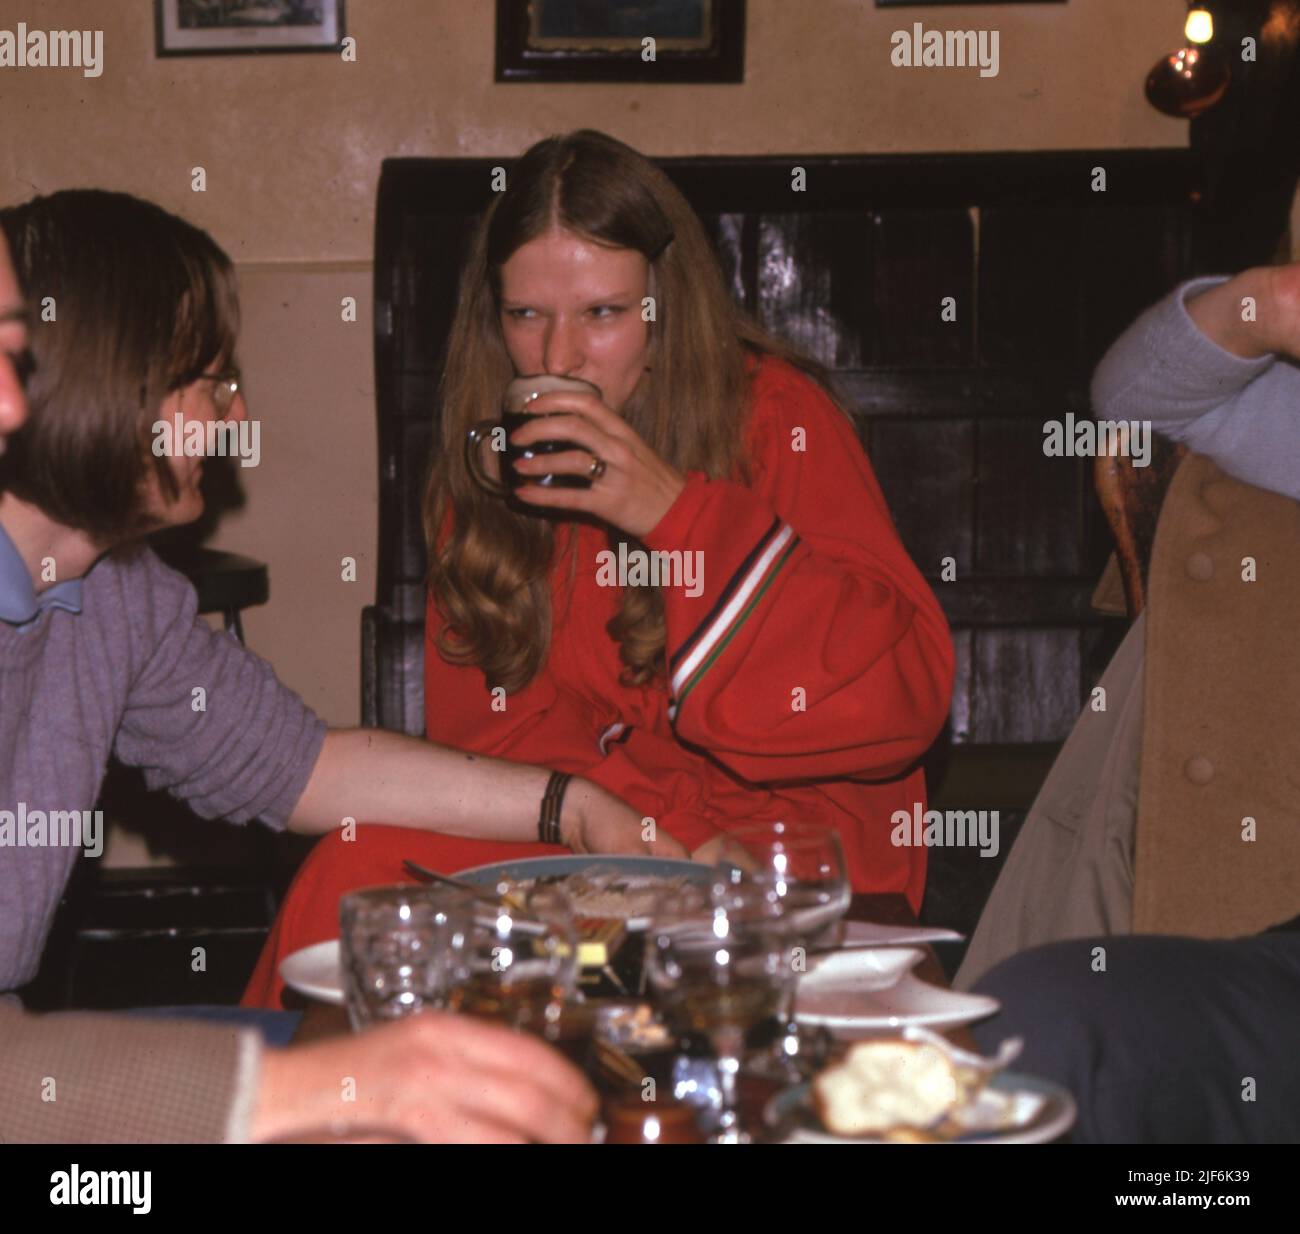 A woman in a red dress enjoying a half pint of stout beer while lunching in a pub. January 1975.   Photo by Tony Henshaw Archive Stock Photo